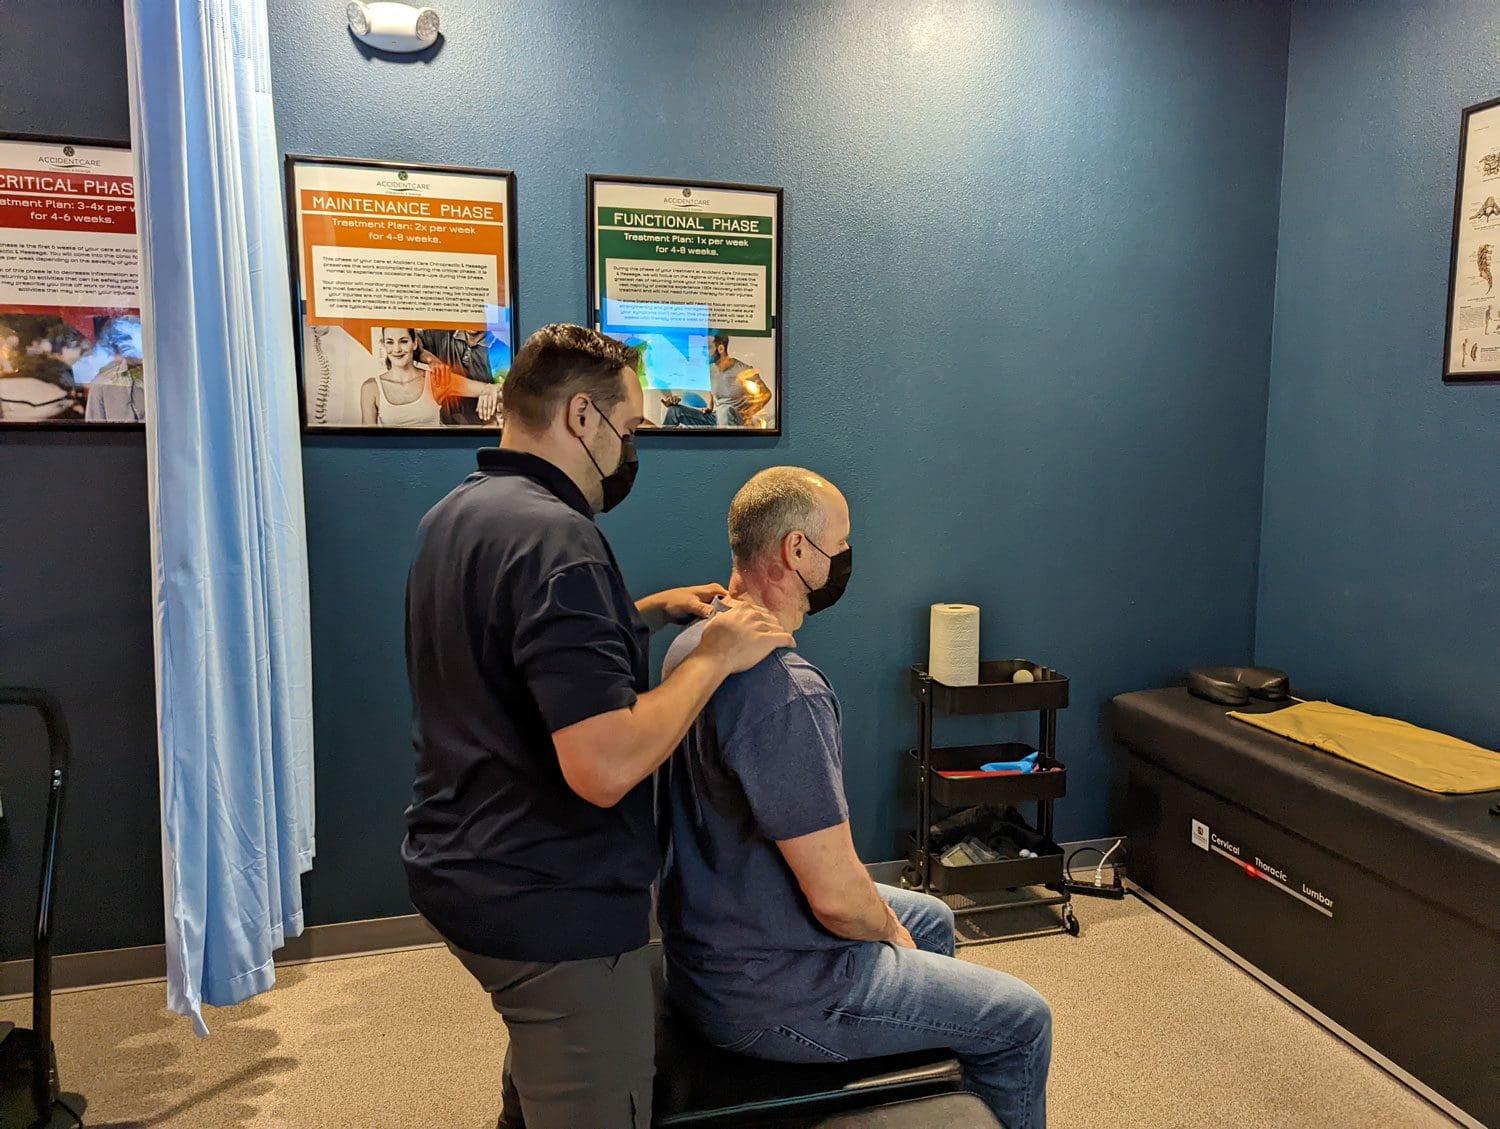 A chiropractor administering an adjustment for a patient at the Vancouver Chiropractic clinic.